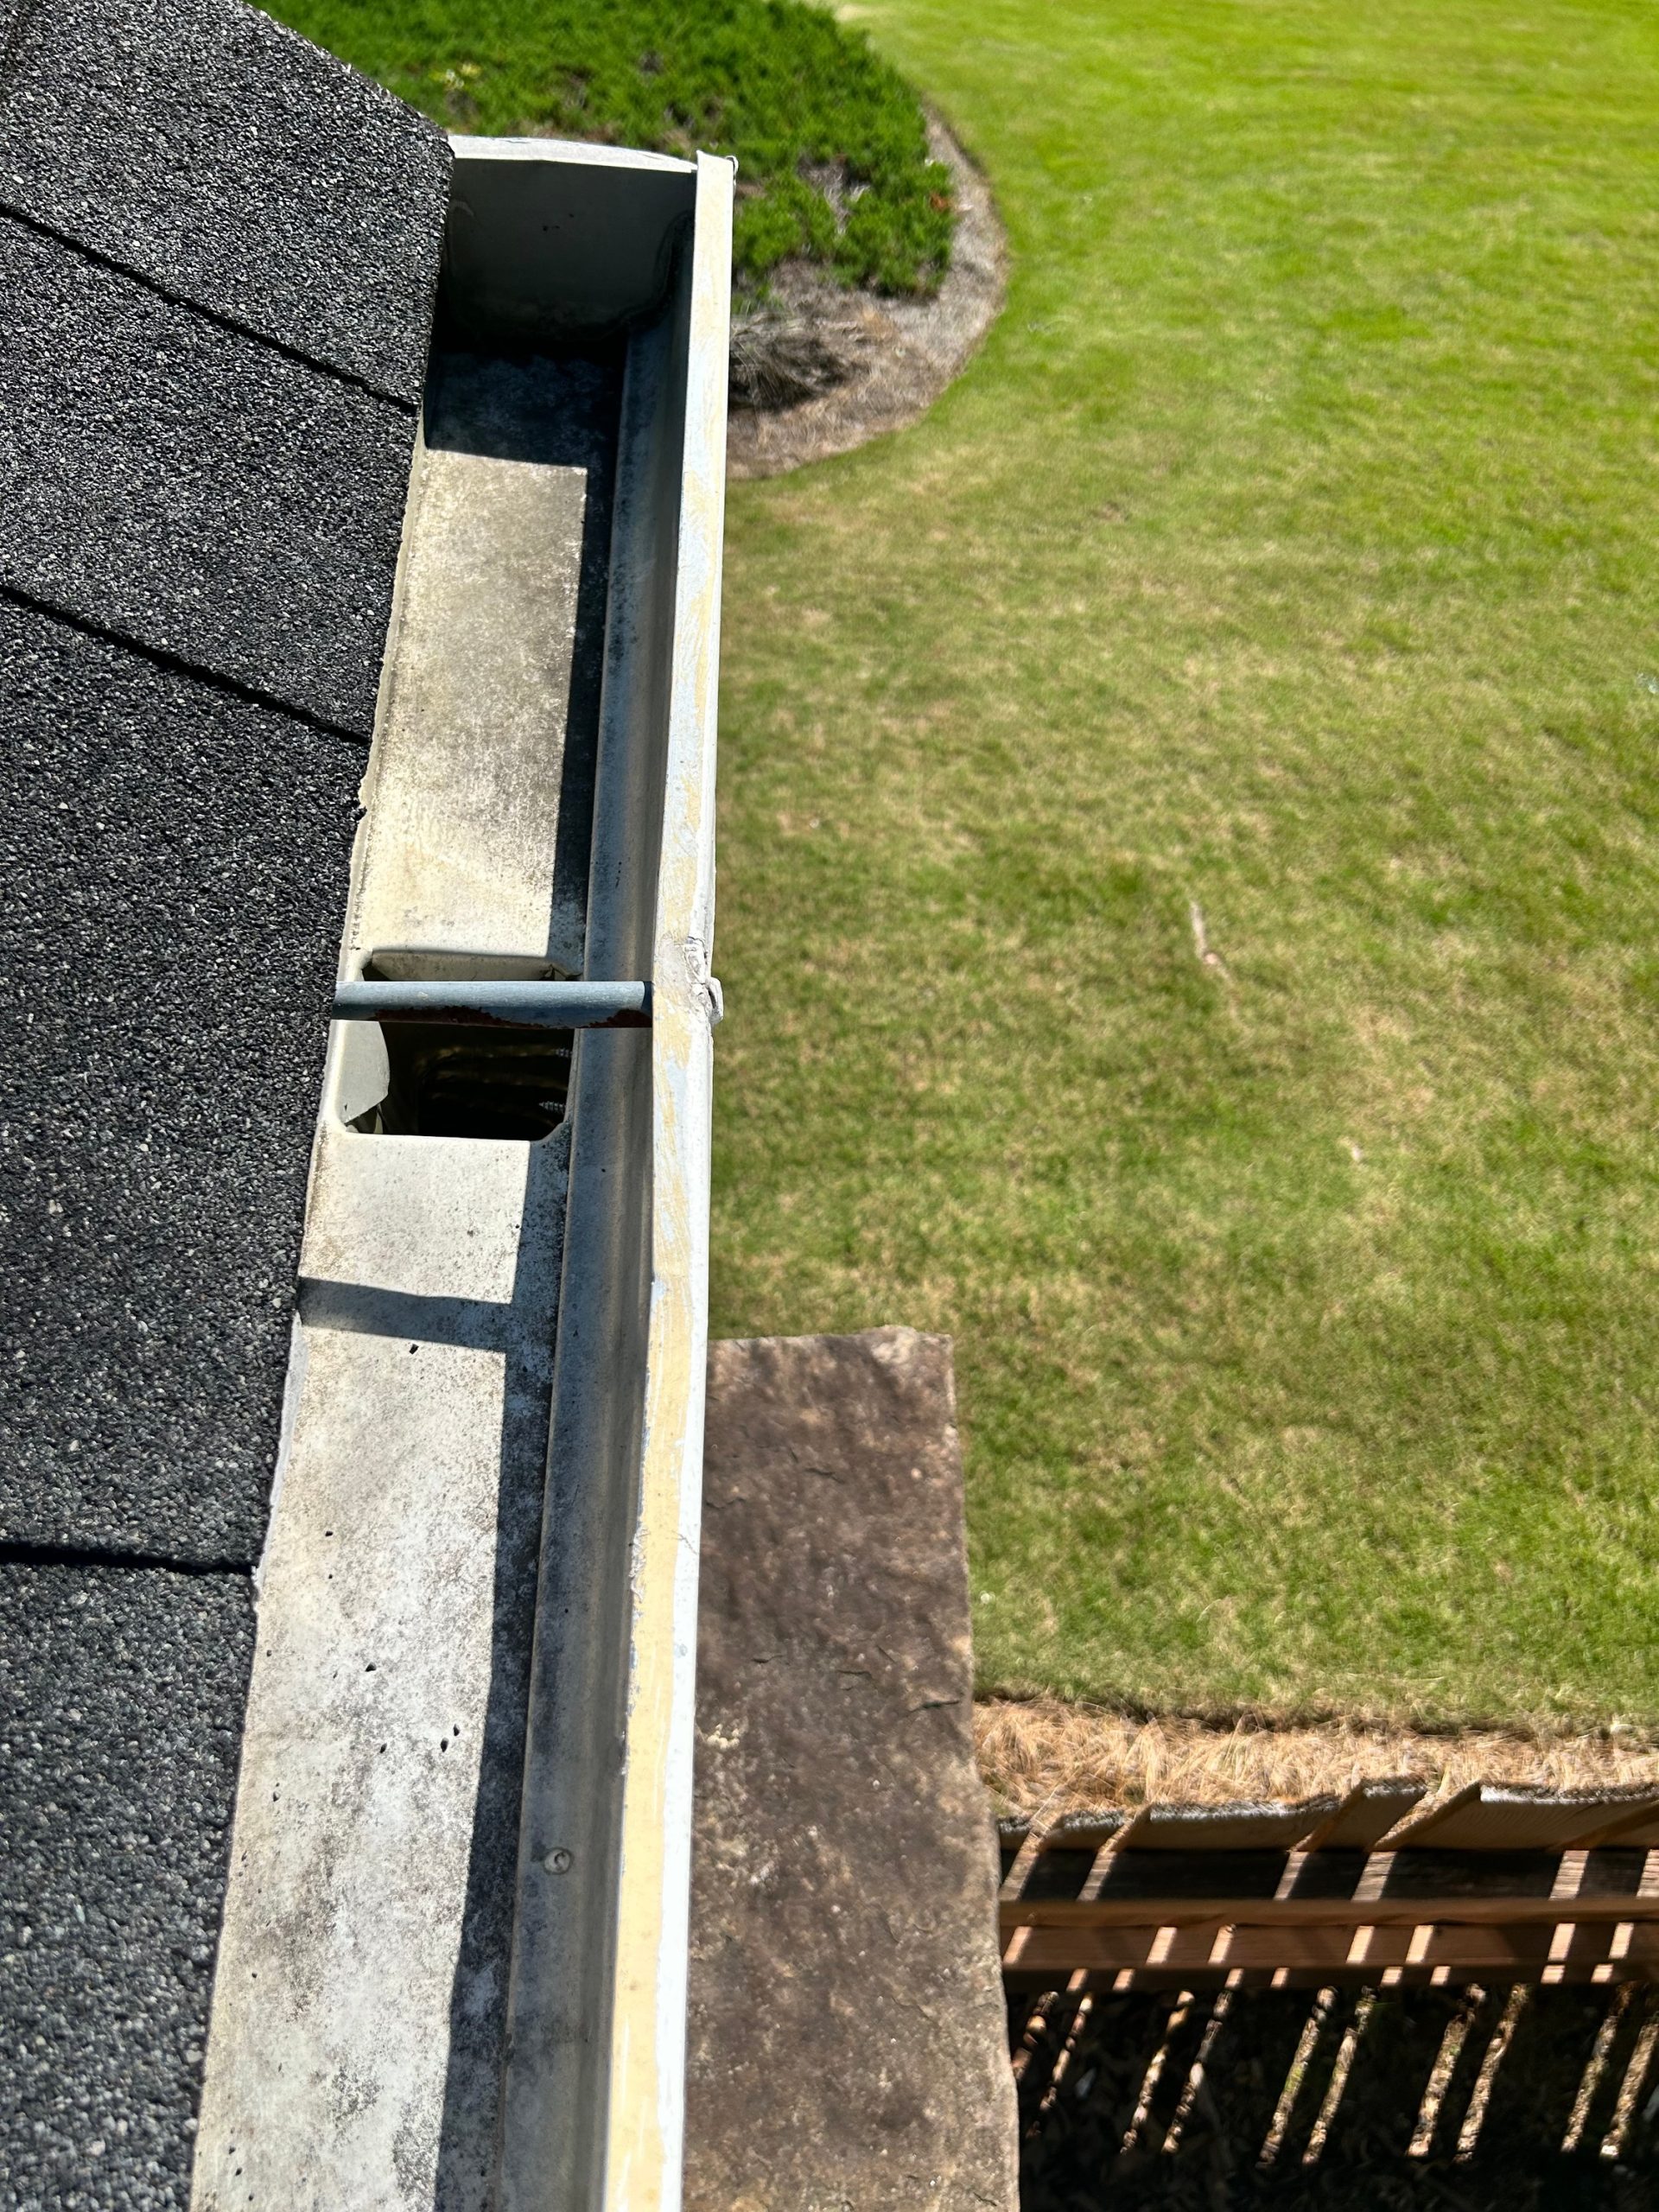 Completed Gutter Cleaning in Wichita for Deirdre's Home